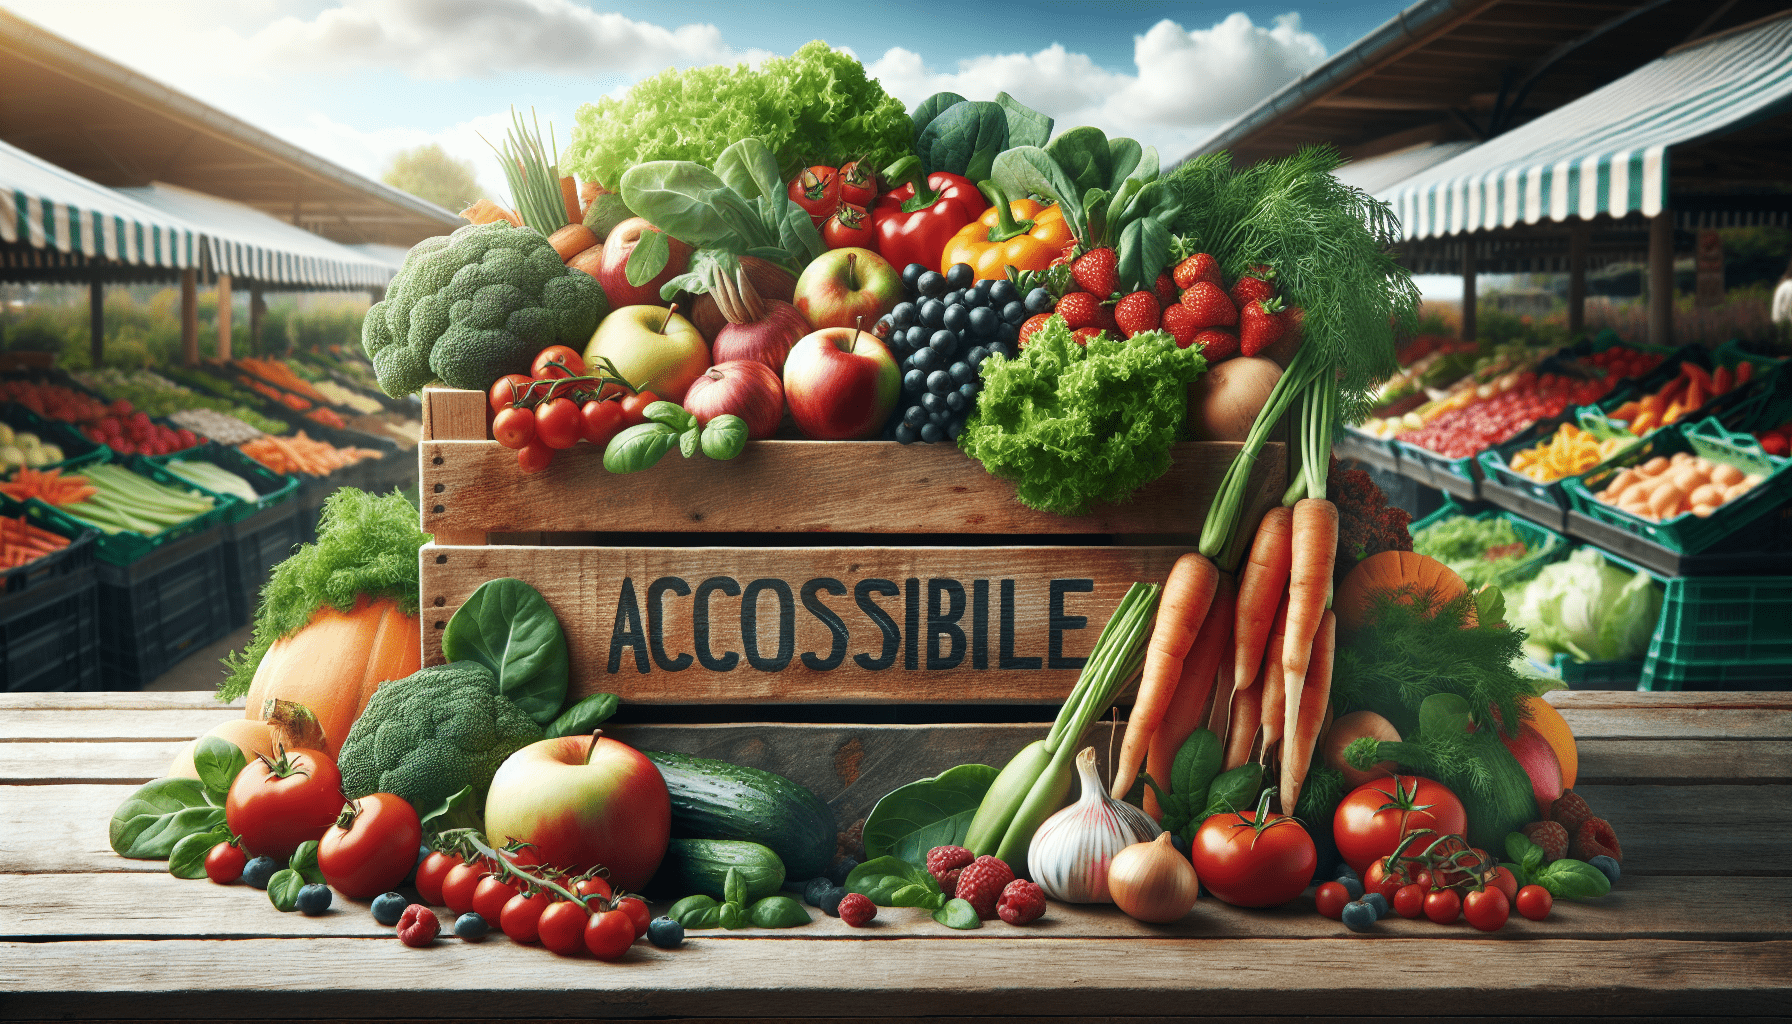 How to Find Affordable Organic Food